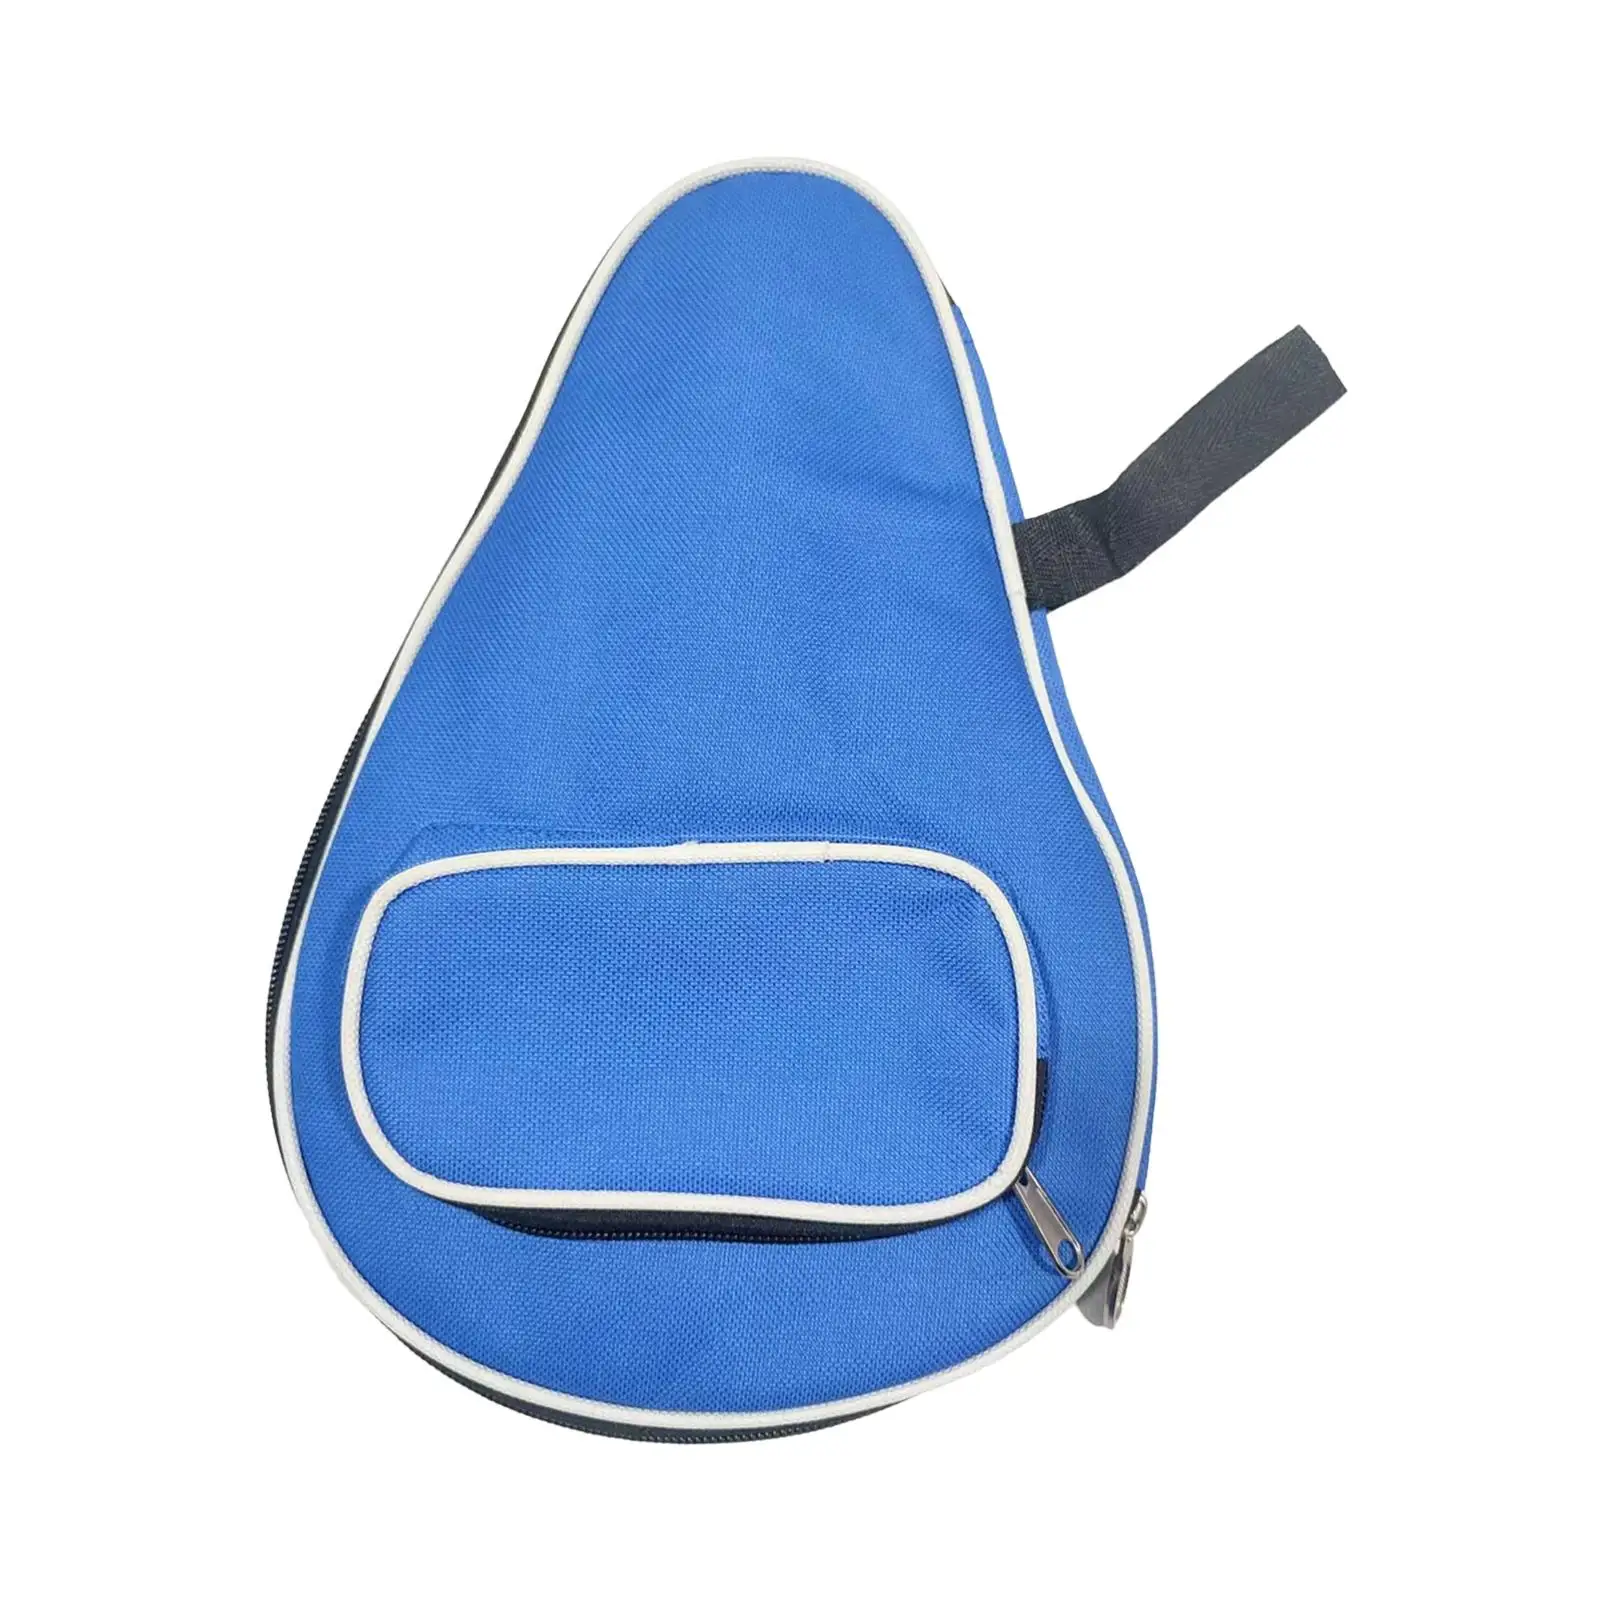 Table Tennis Racket Cover Large Capacity Professional Dustproof Waterproof Racket Pocket for Competition Travel Training Outdoor